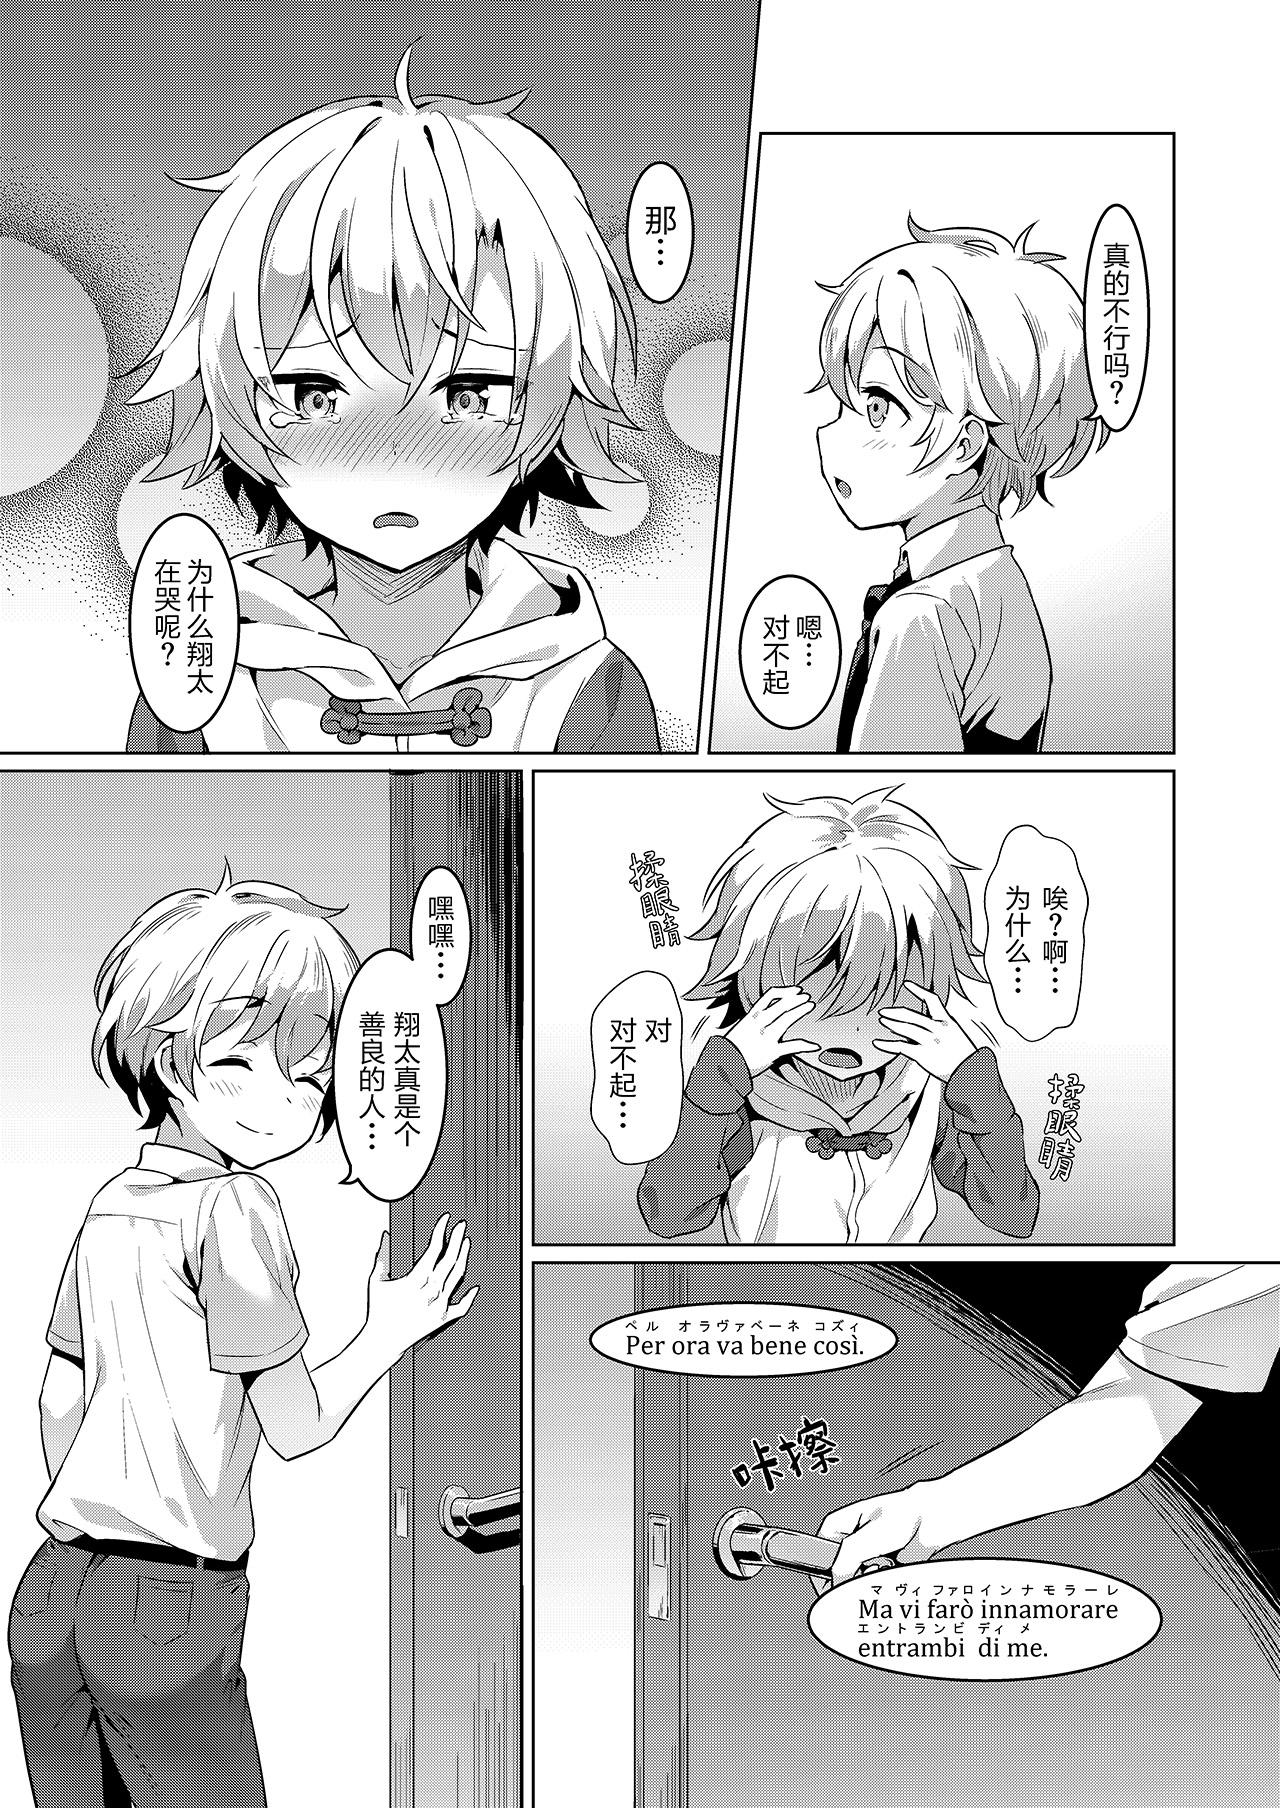 Daddy [Commamion (Numa)] Ibunka Room Sharing 2 - Cross-Cultural Room Sharing 2 [Chinese] [Digital] [Decensored] - Original Best Blowjobs Ever - Page 12